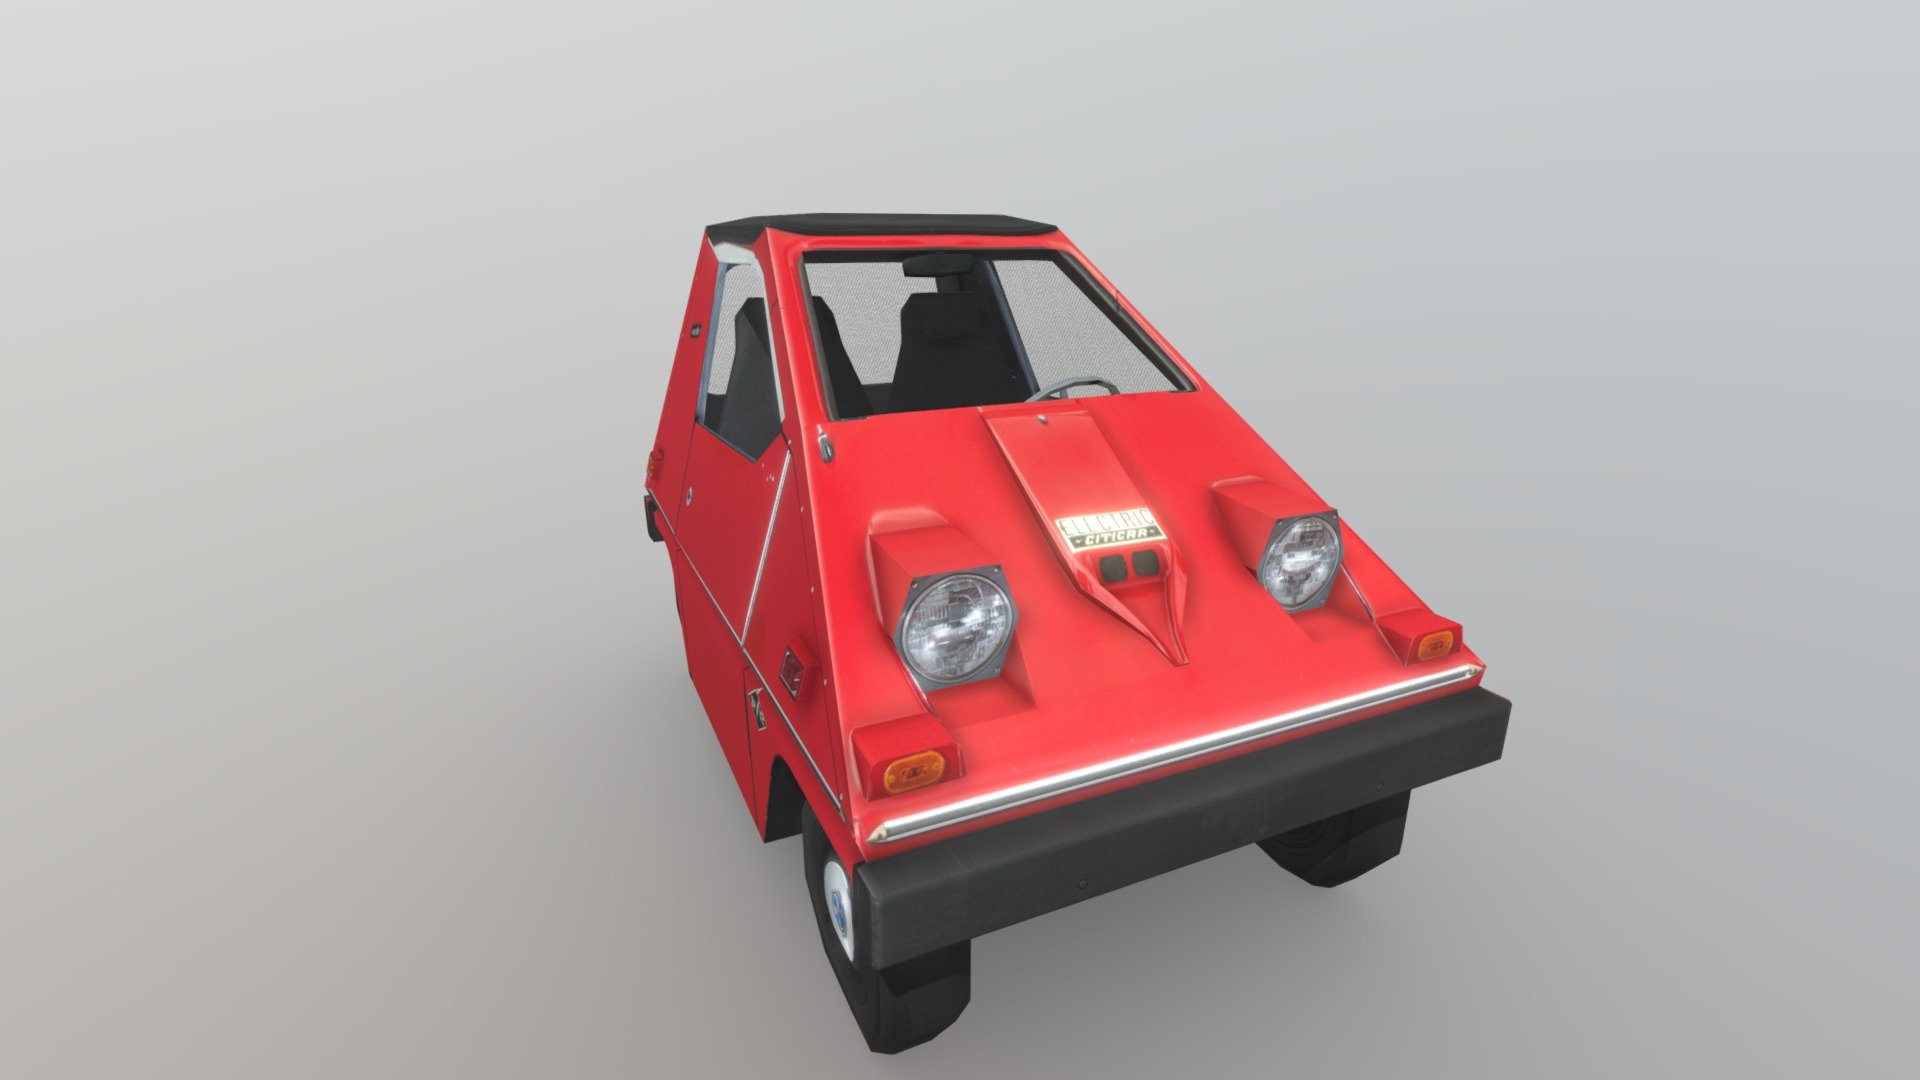 Modeled and textured using reference images from https://www.historicvehicle.org/drivehistory-profile-sebring-vanguard-citicar/ - 1976 Sebring-Vanguard Citicar - Download Free 3D model by stevenharmongames (@shg) 3d model